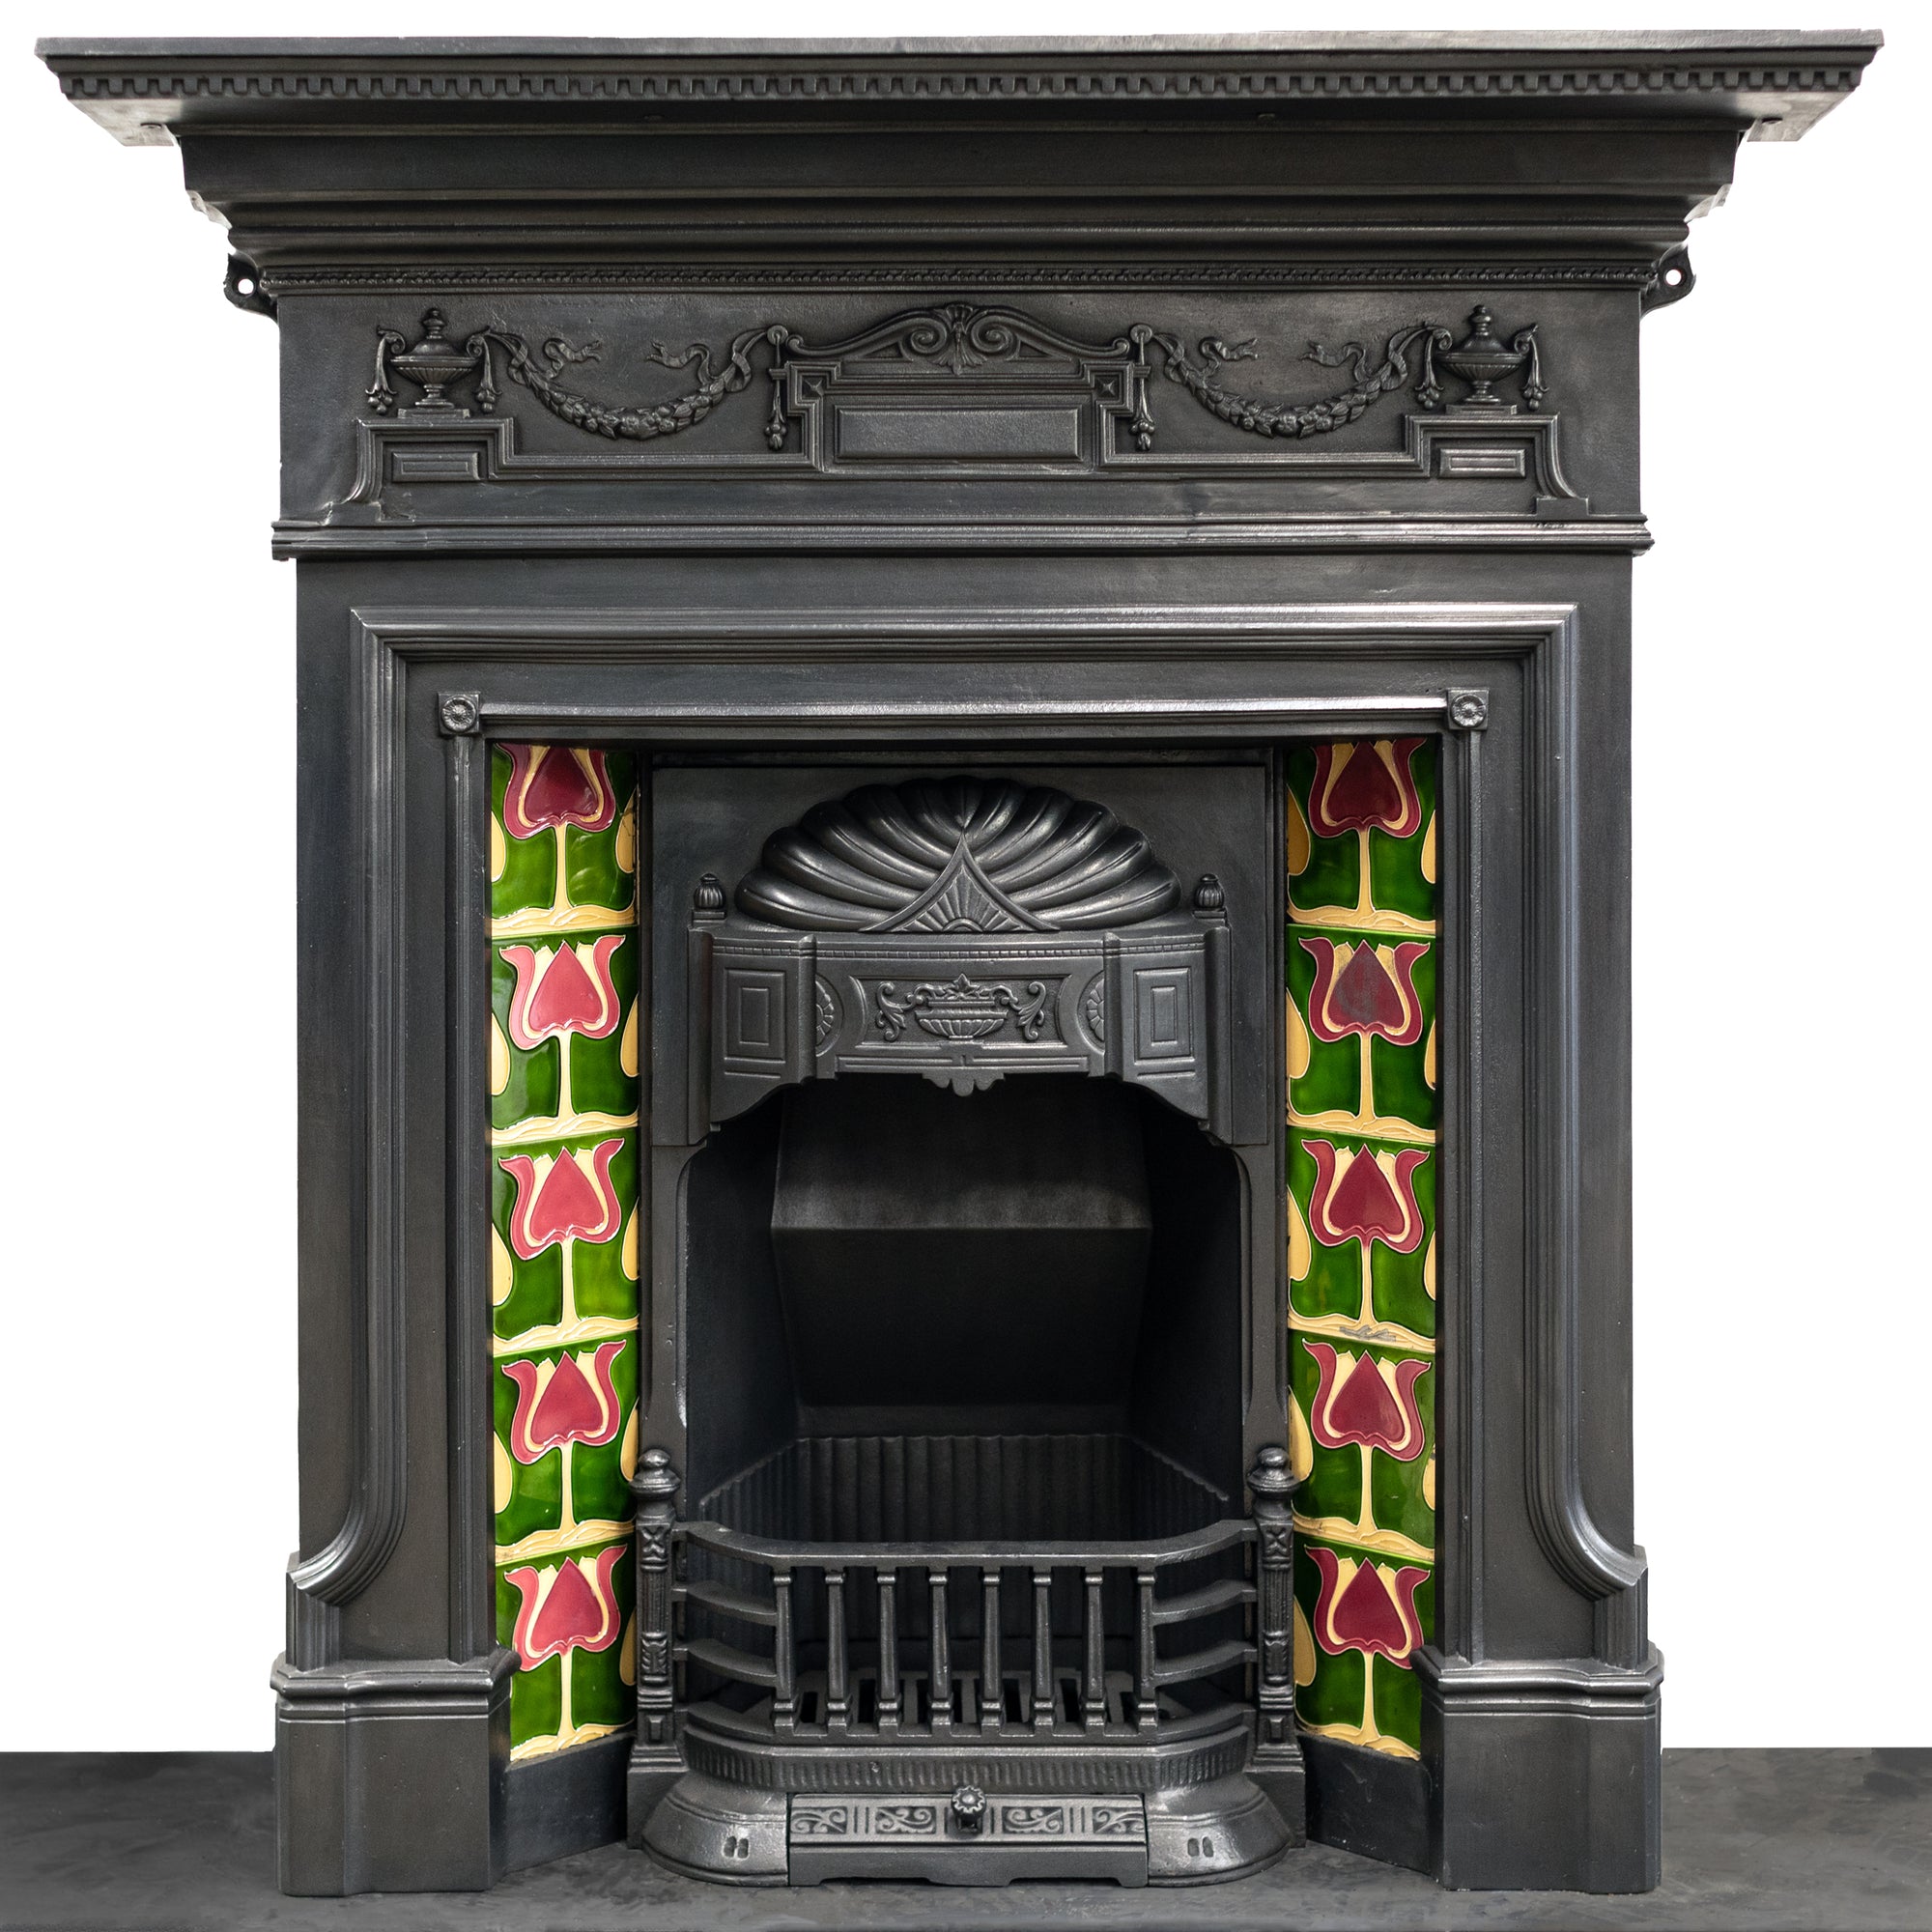 Antique Art Nouveau Combination Fireplace with Green & Red Tiles | The Architectural Forum